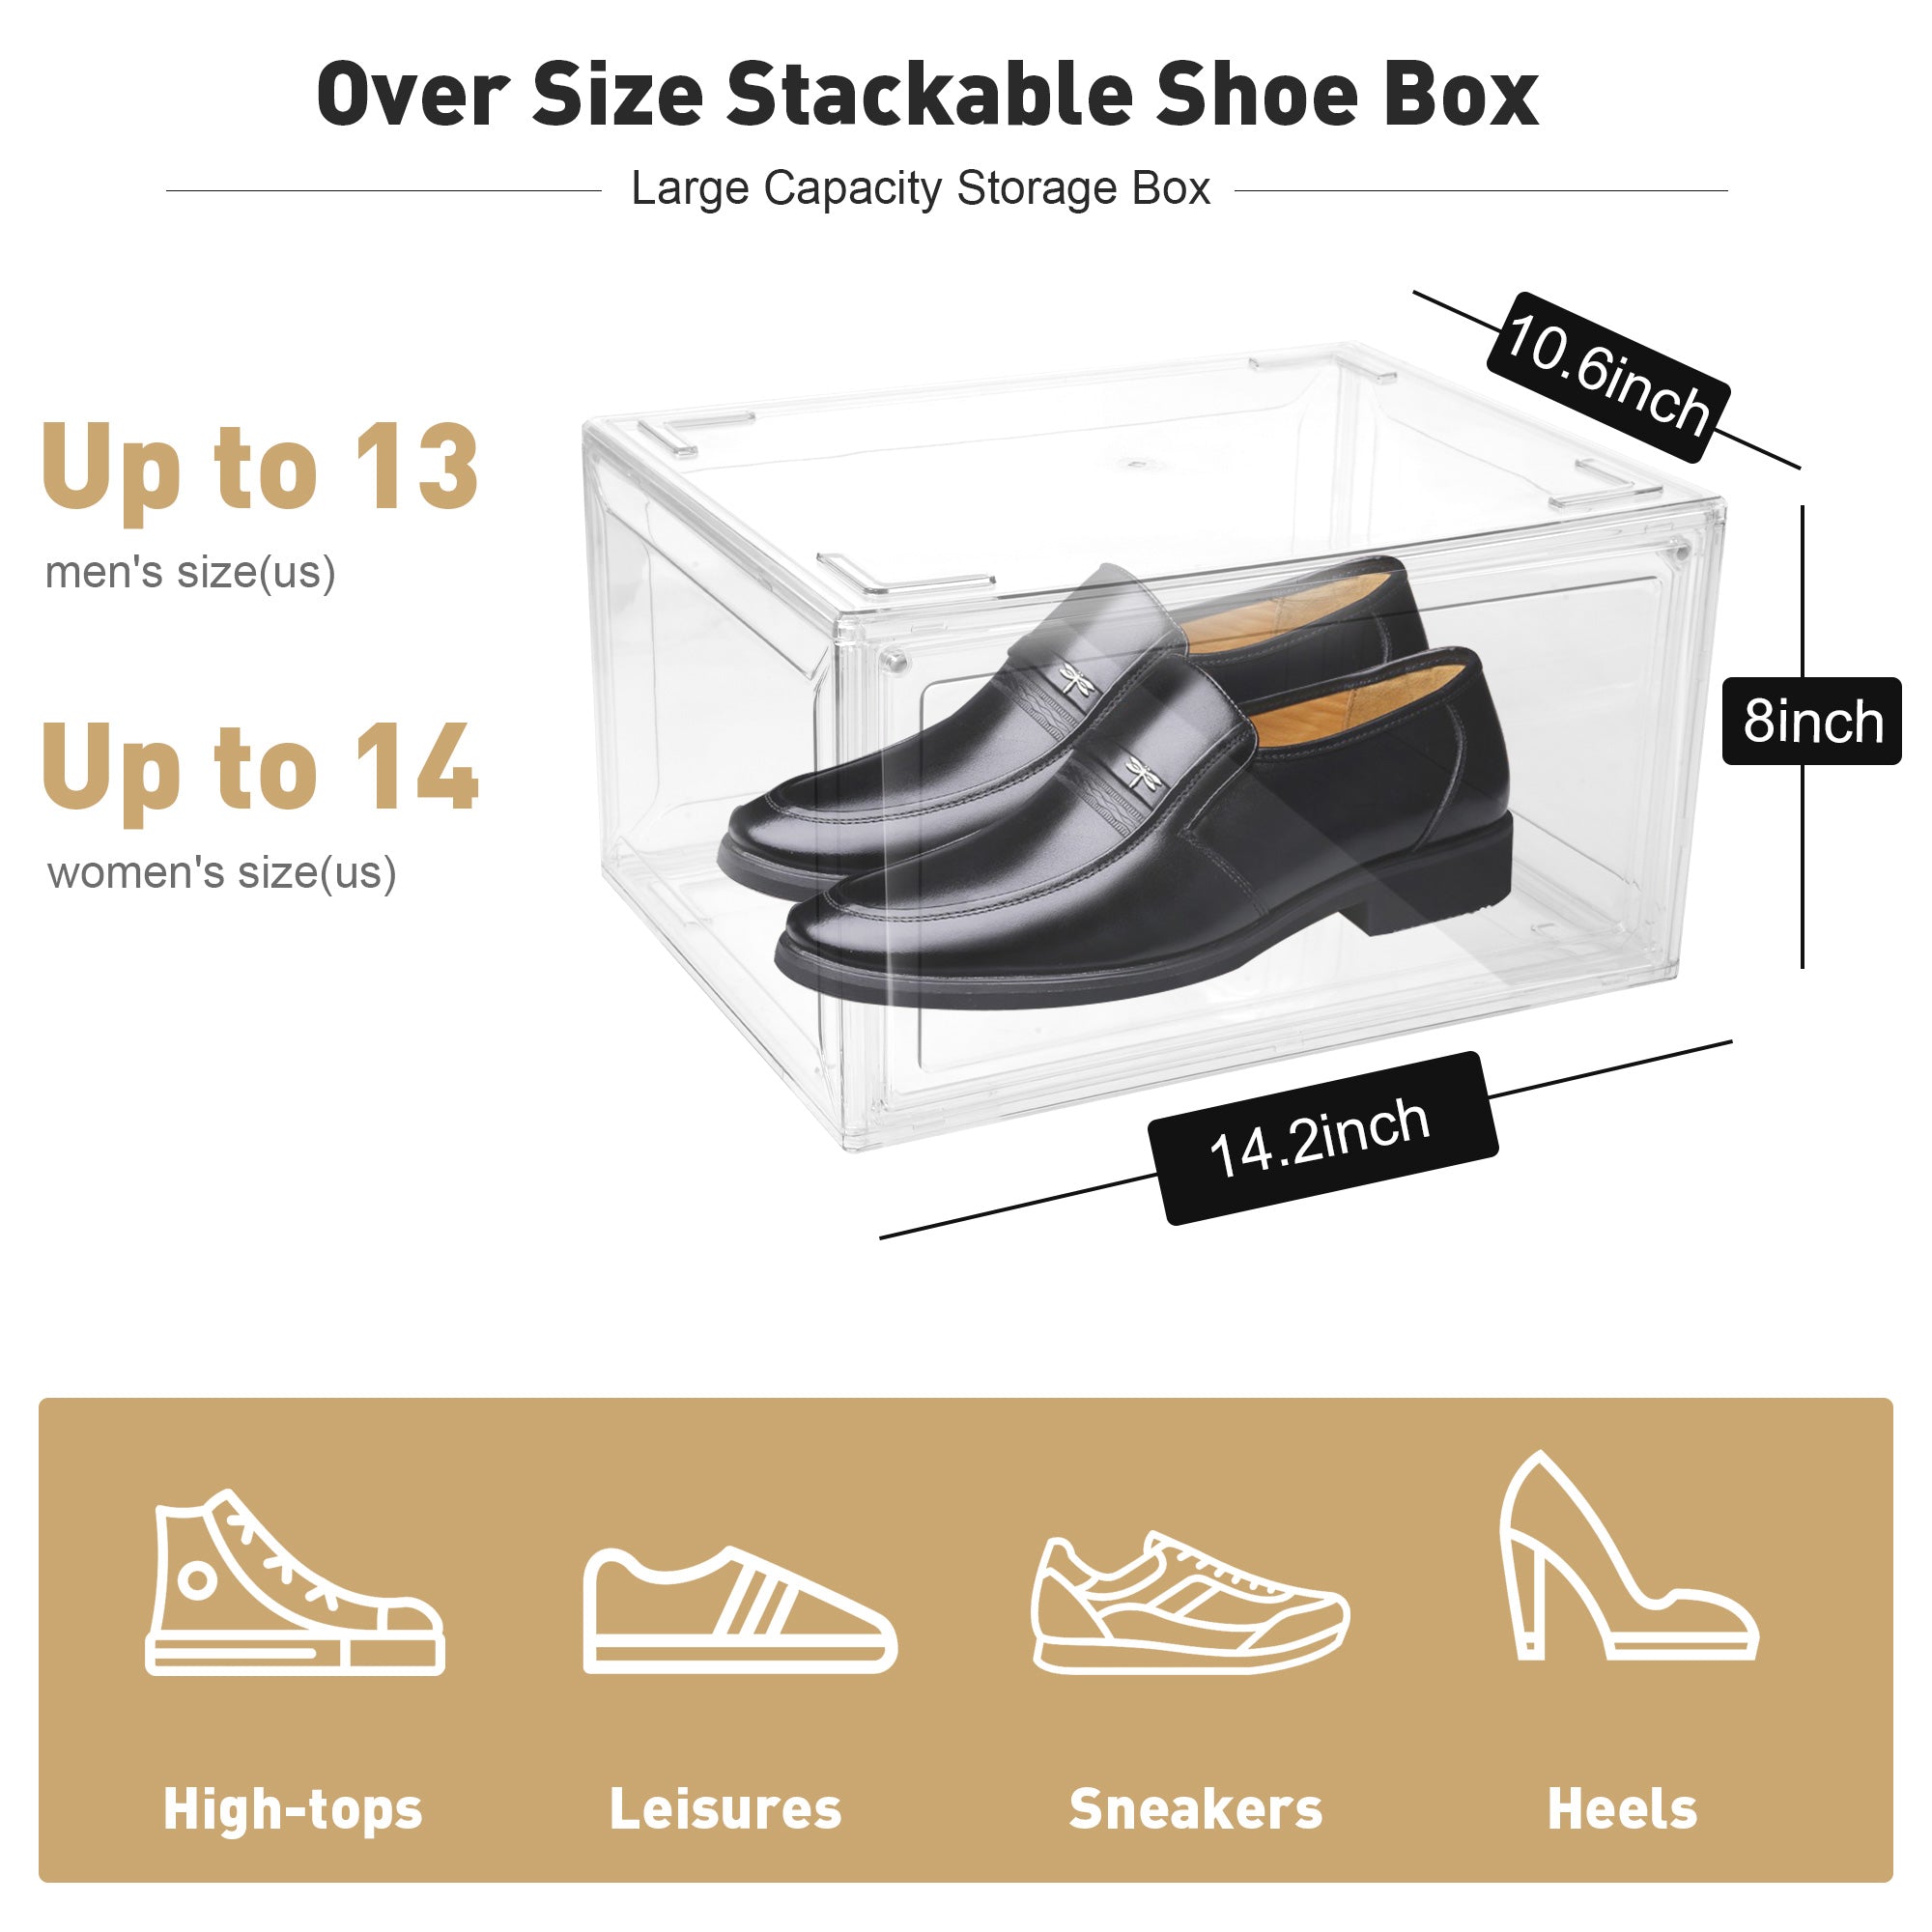 Set of 4 Shoe Storage Box Clear Plastic Stackable Shoe Organizer with Front Magnetic Door